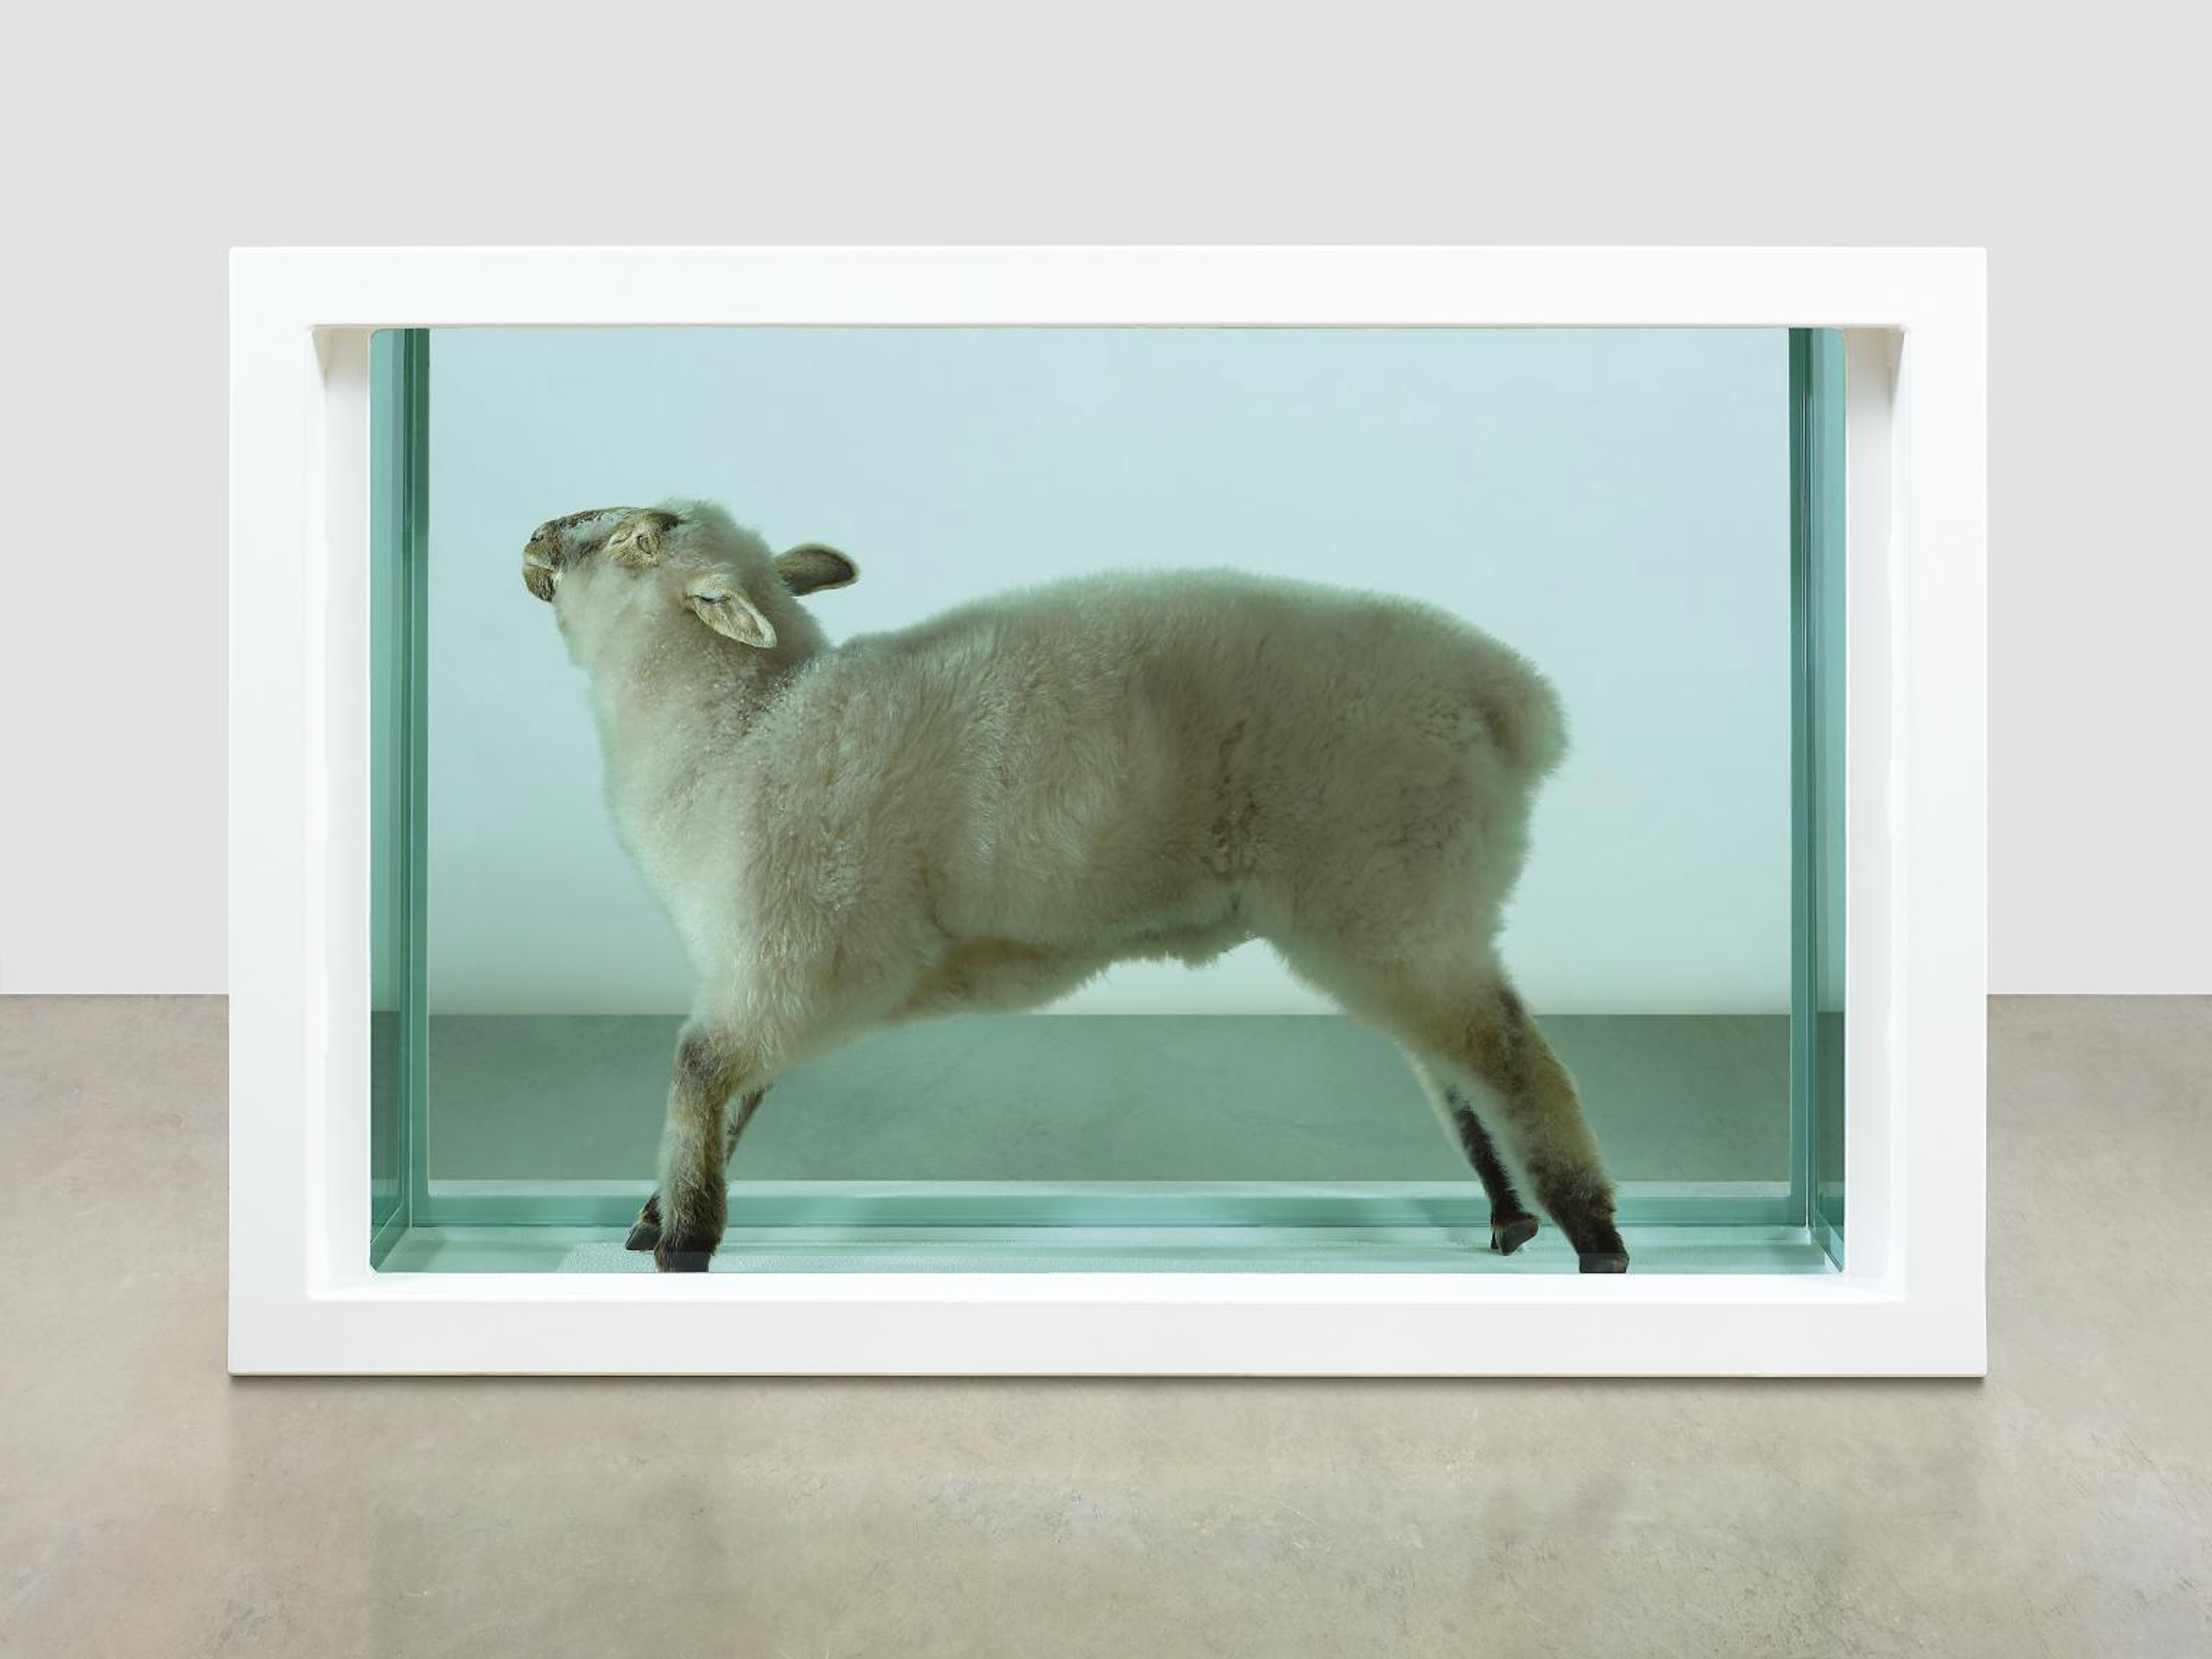 Damien Hirst’s Away From The Flock. A photograph of an art installation of a sheep in a tank of formaldehyde